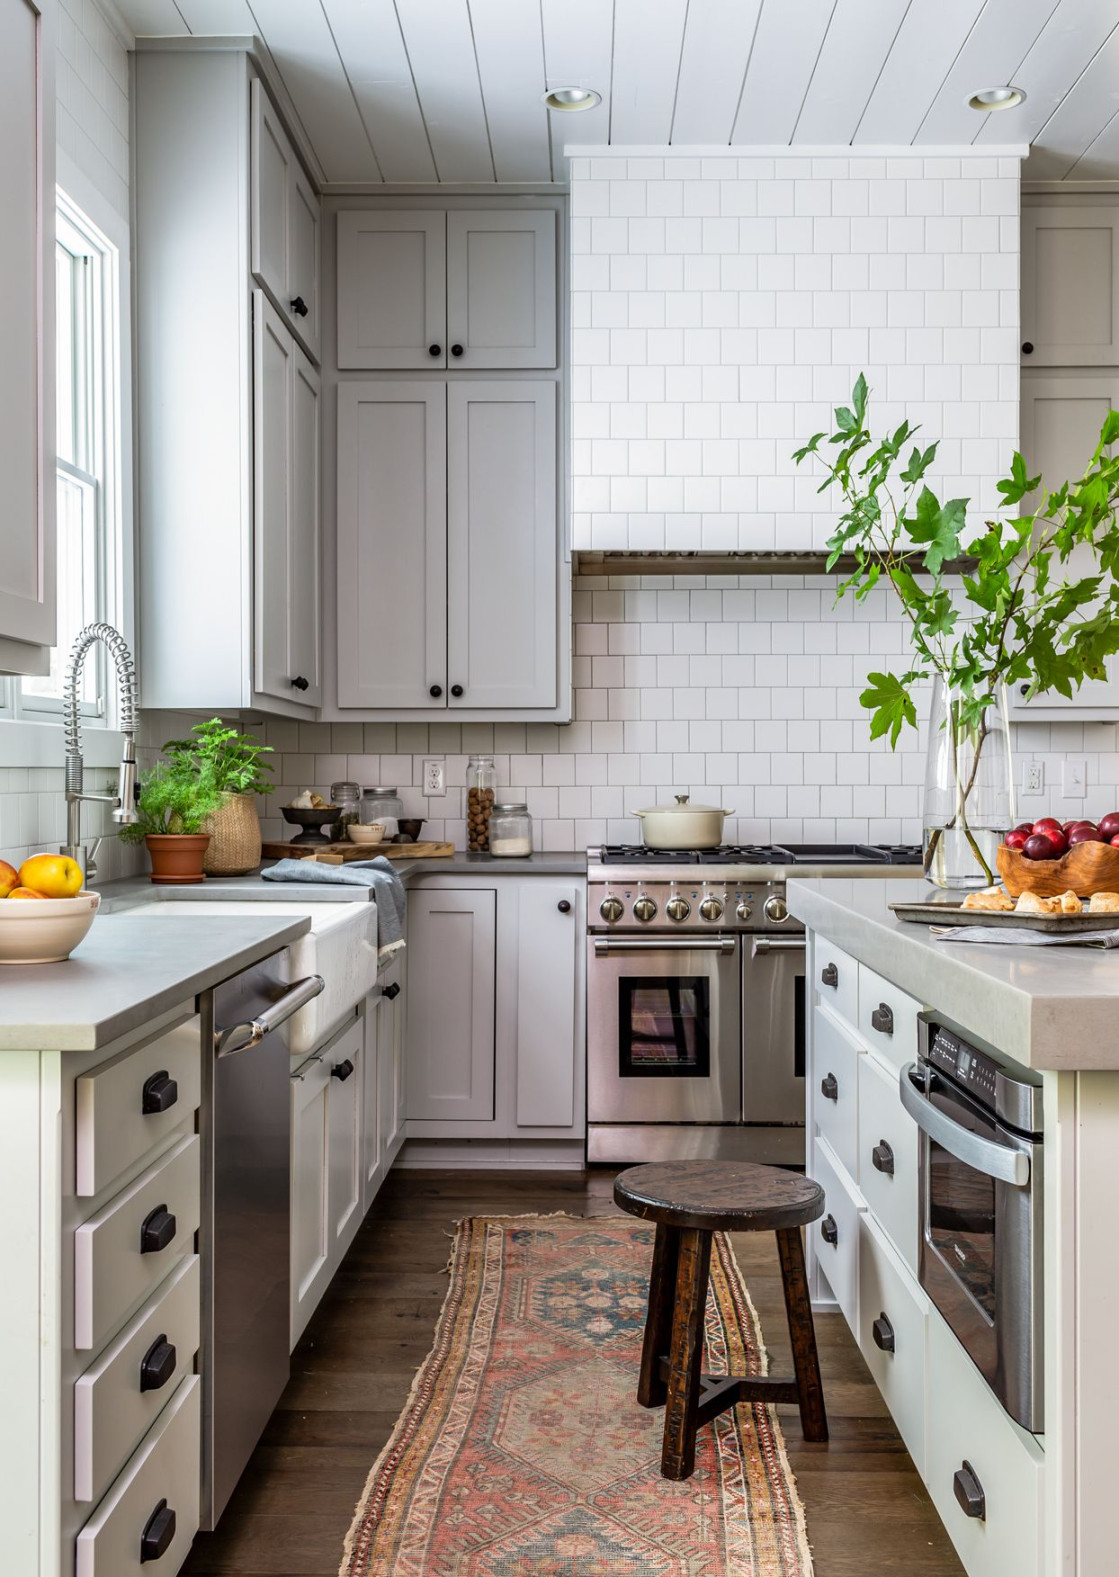 Kitchen Floor Plans to Help You Take on a Remodel with Confidence